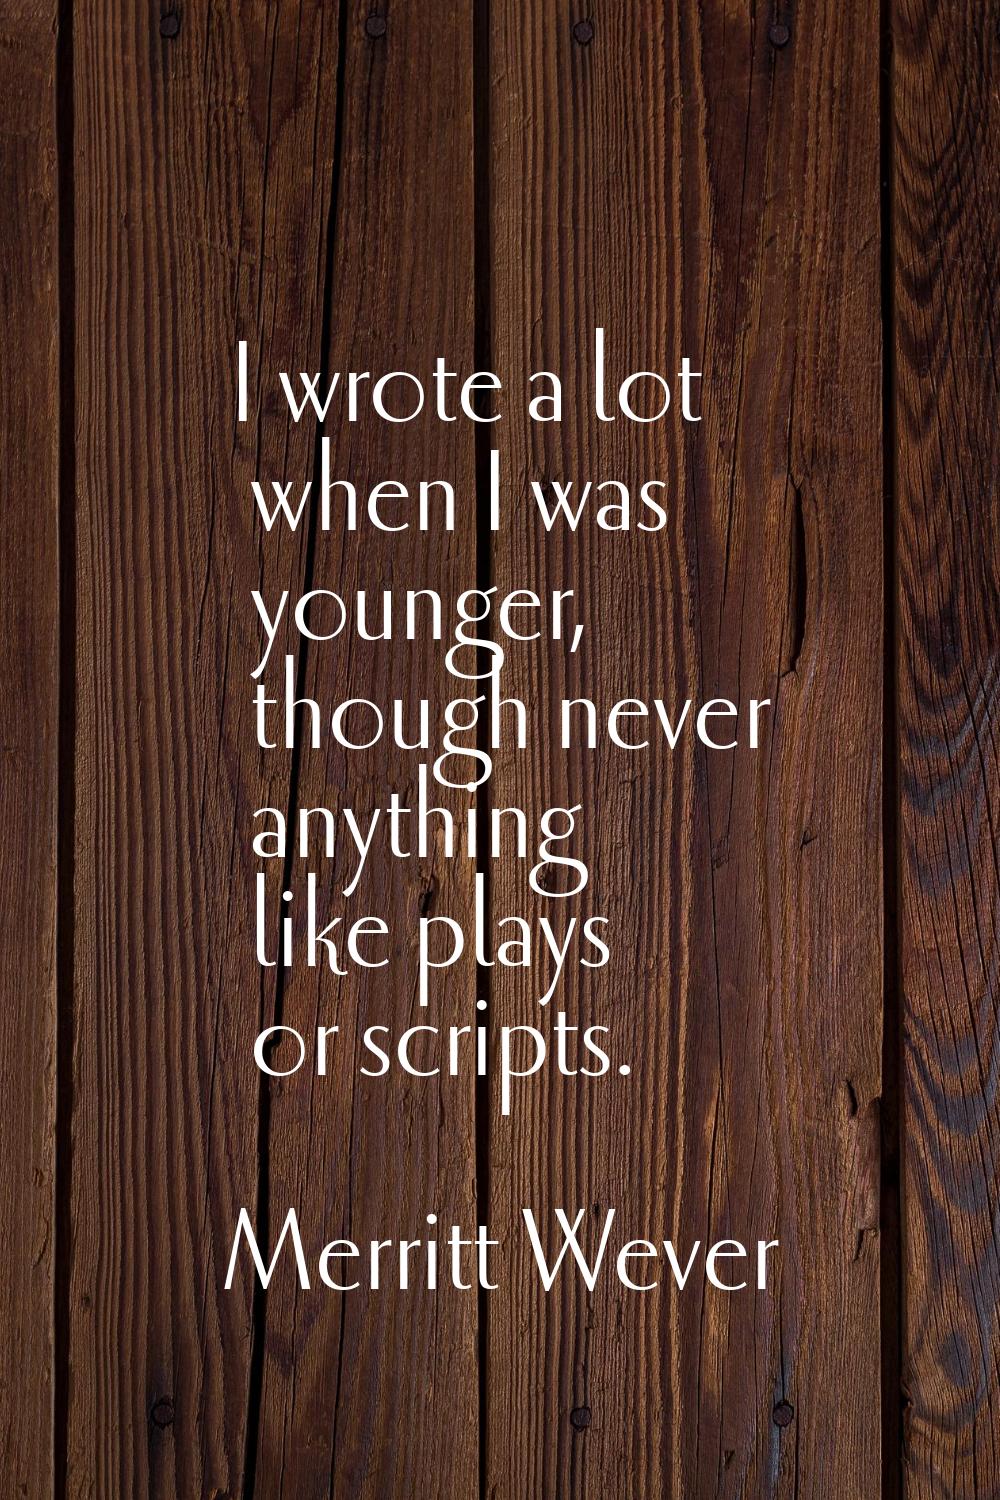 I wrote a lot when I was younger, though never anything like plays or scripts.